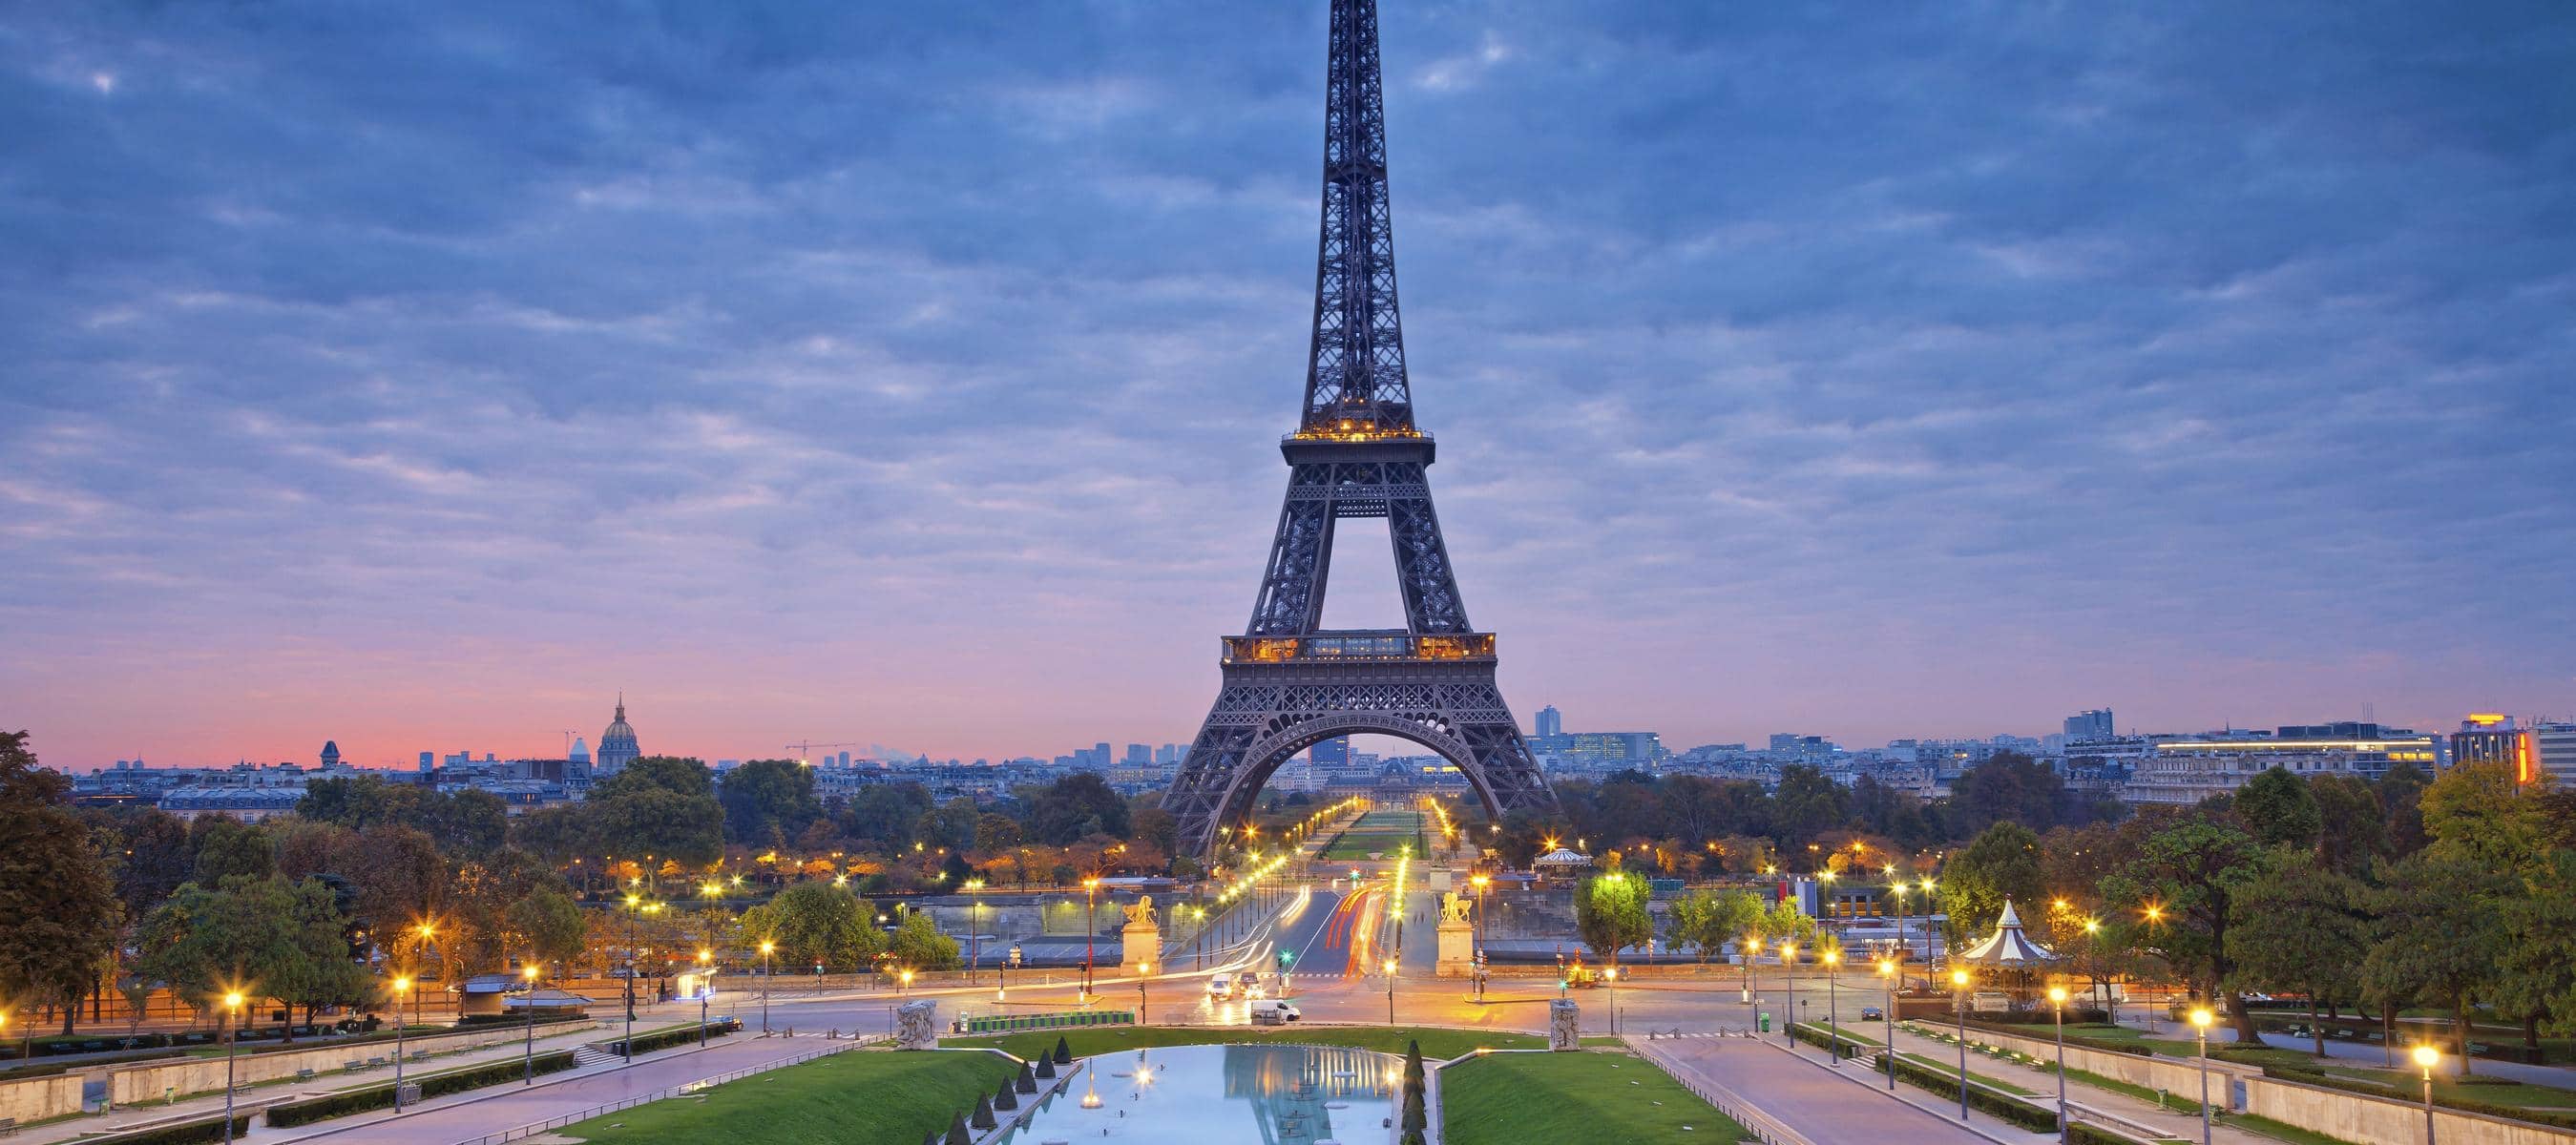 One of the largest Cities in France - Paris.